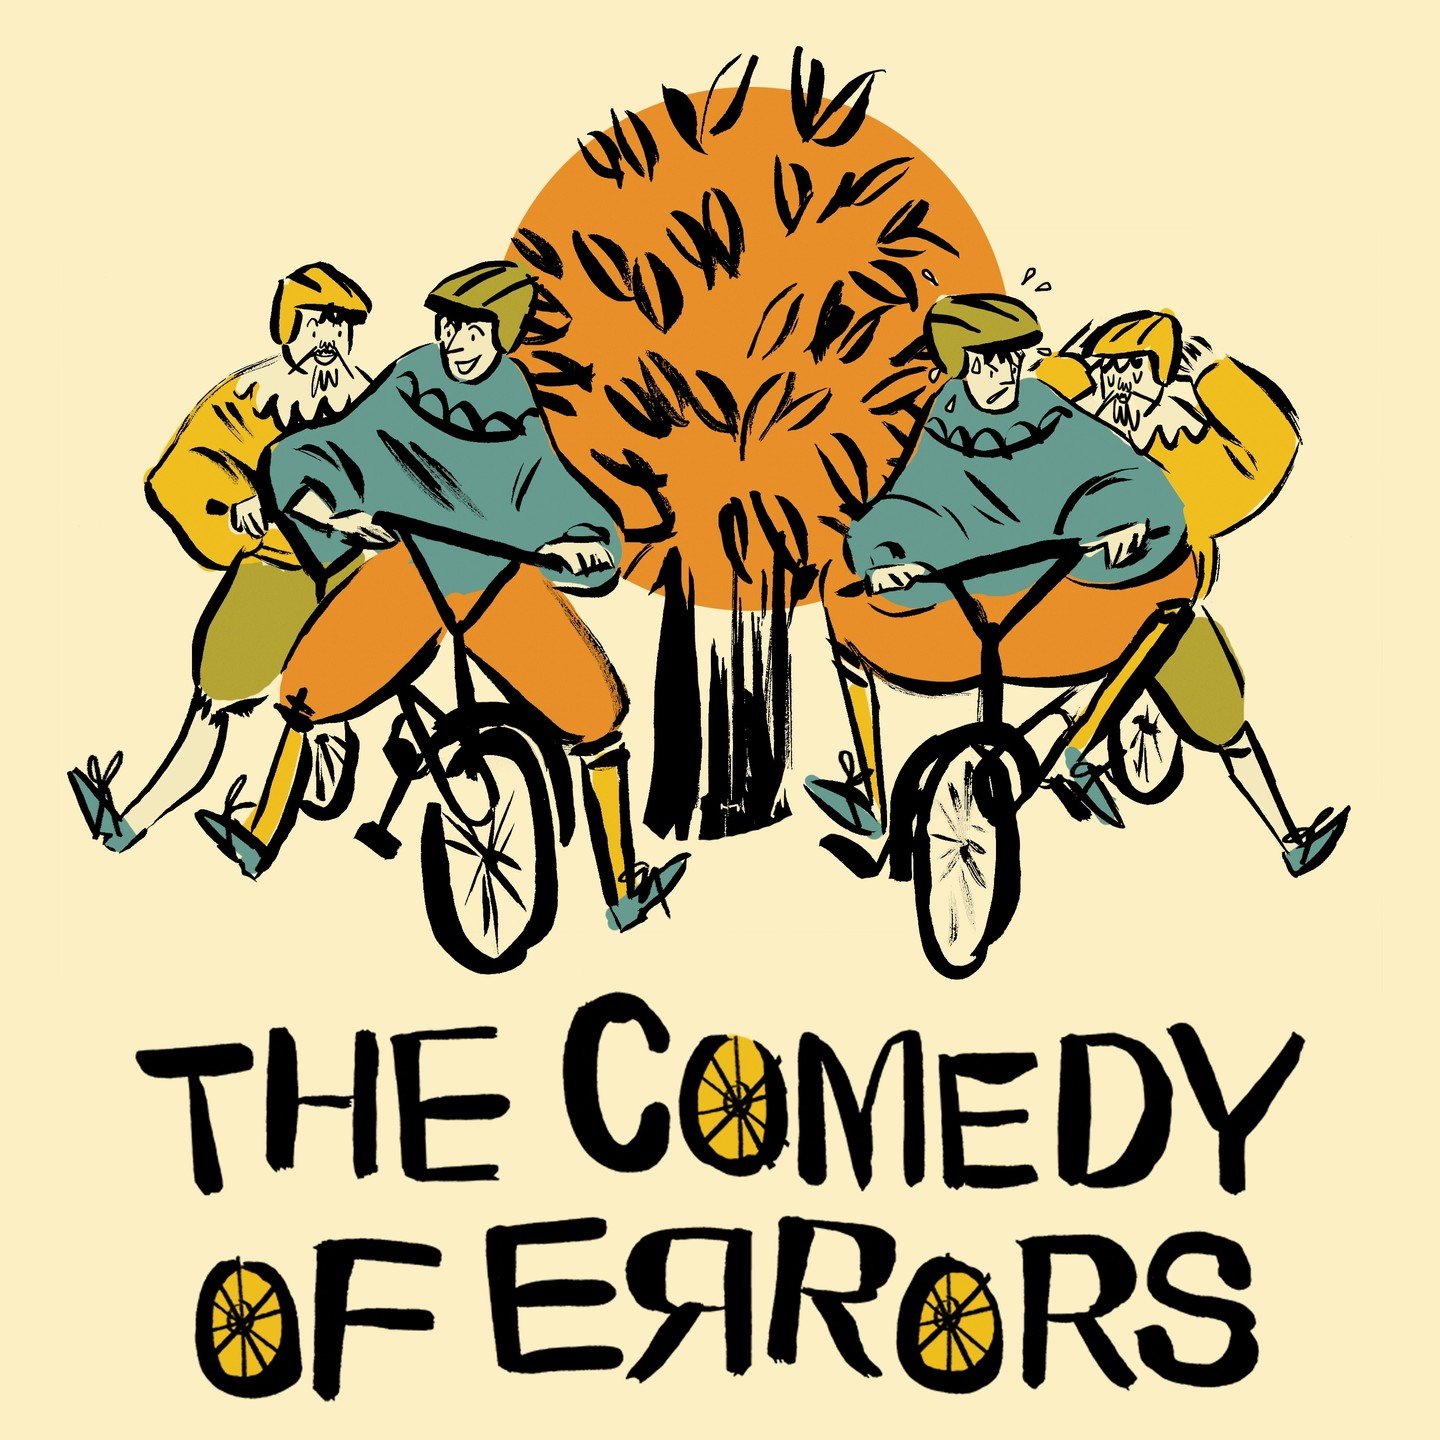 Over 50% of tickets sold for The HandleBards latest production of Shakespeare's The Comedy of Errors on Thursday 30th May at 7pm.

After battling in our garden with bell-ringing practice at St Peter's Church last year, the bicycle-powered troupe are 